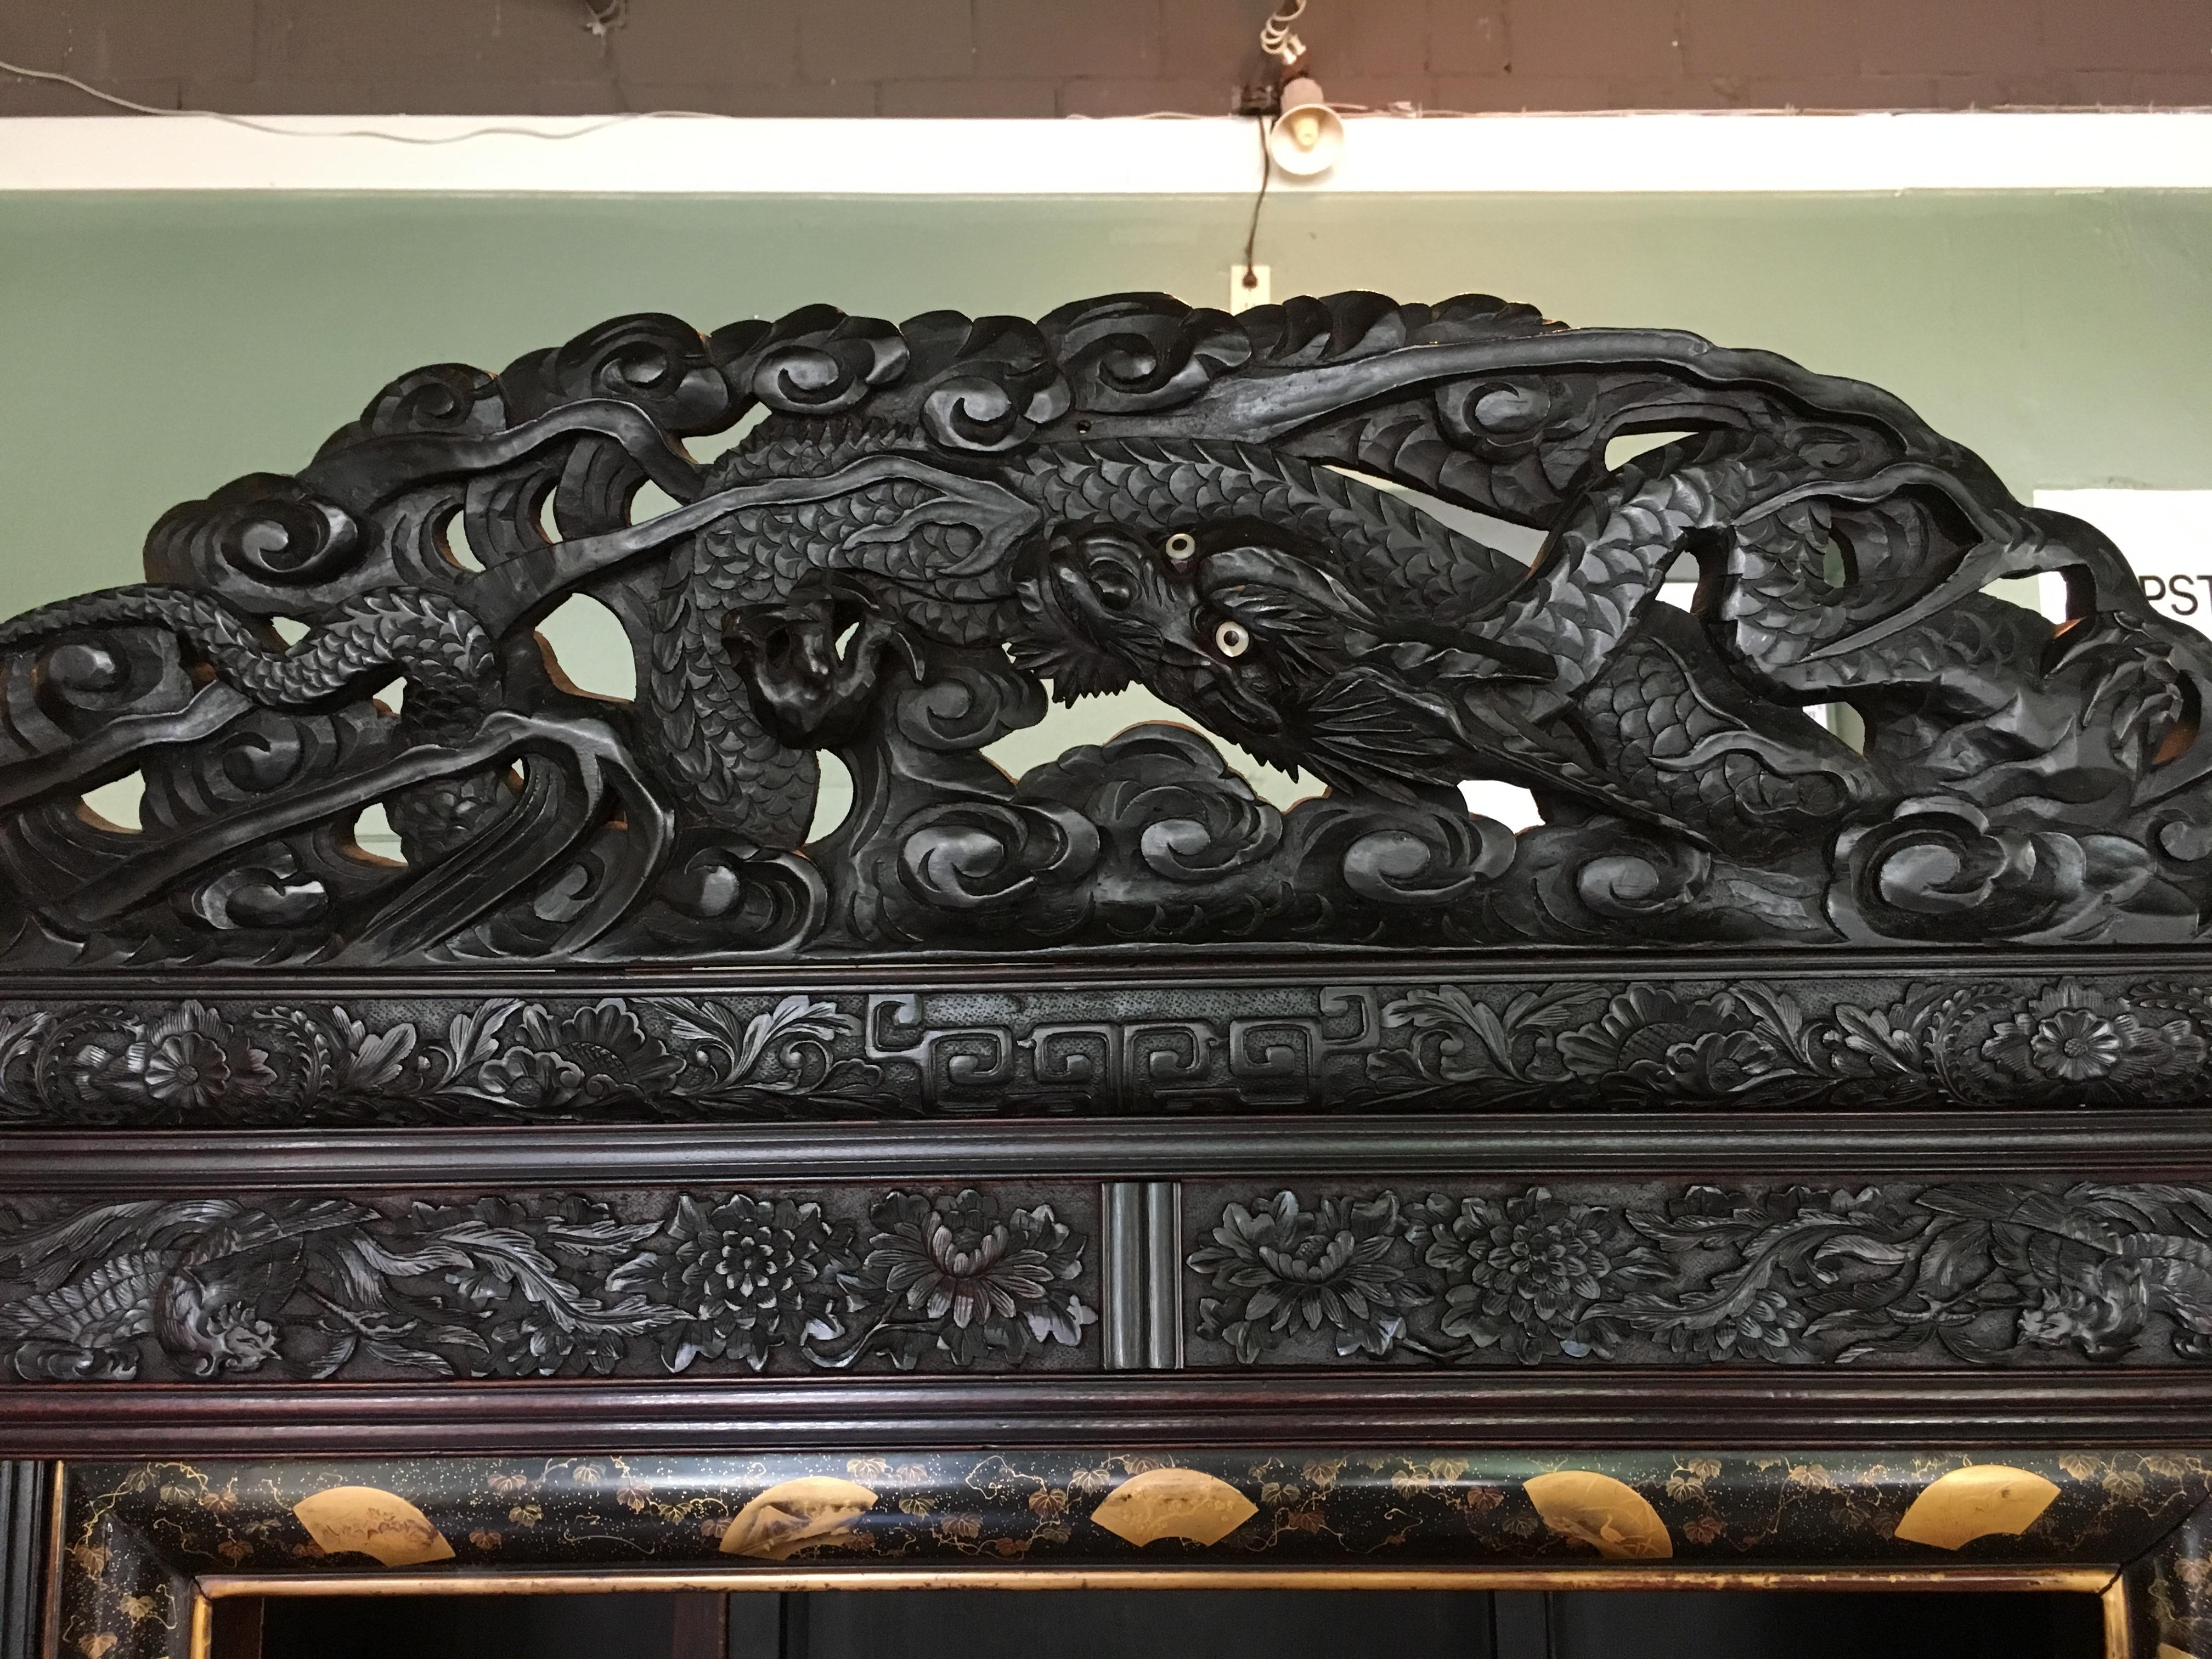 A powerfully carved and ebonized Japanese Meiji Period display cabinet, known as a shodana, made for the Victorian export market.

The cabinet is heavily carved in relief with writhing dragons carved throughout, several featuring mother of pearl